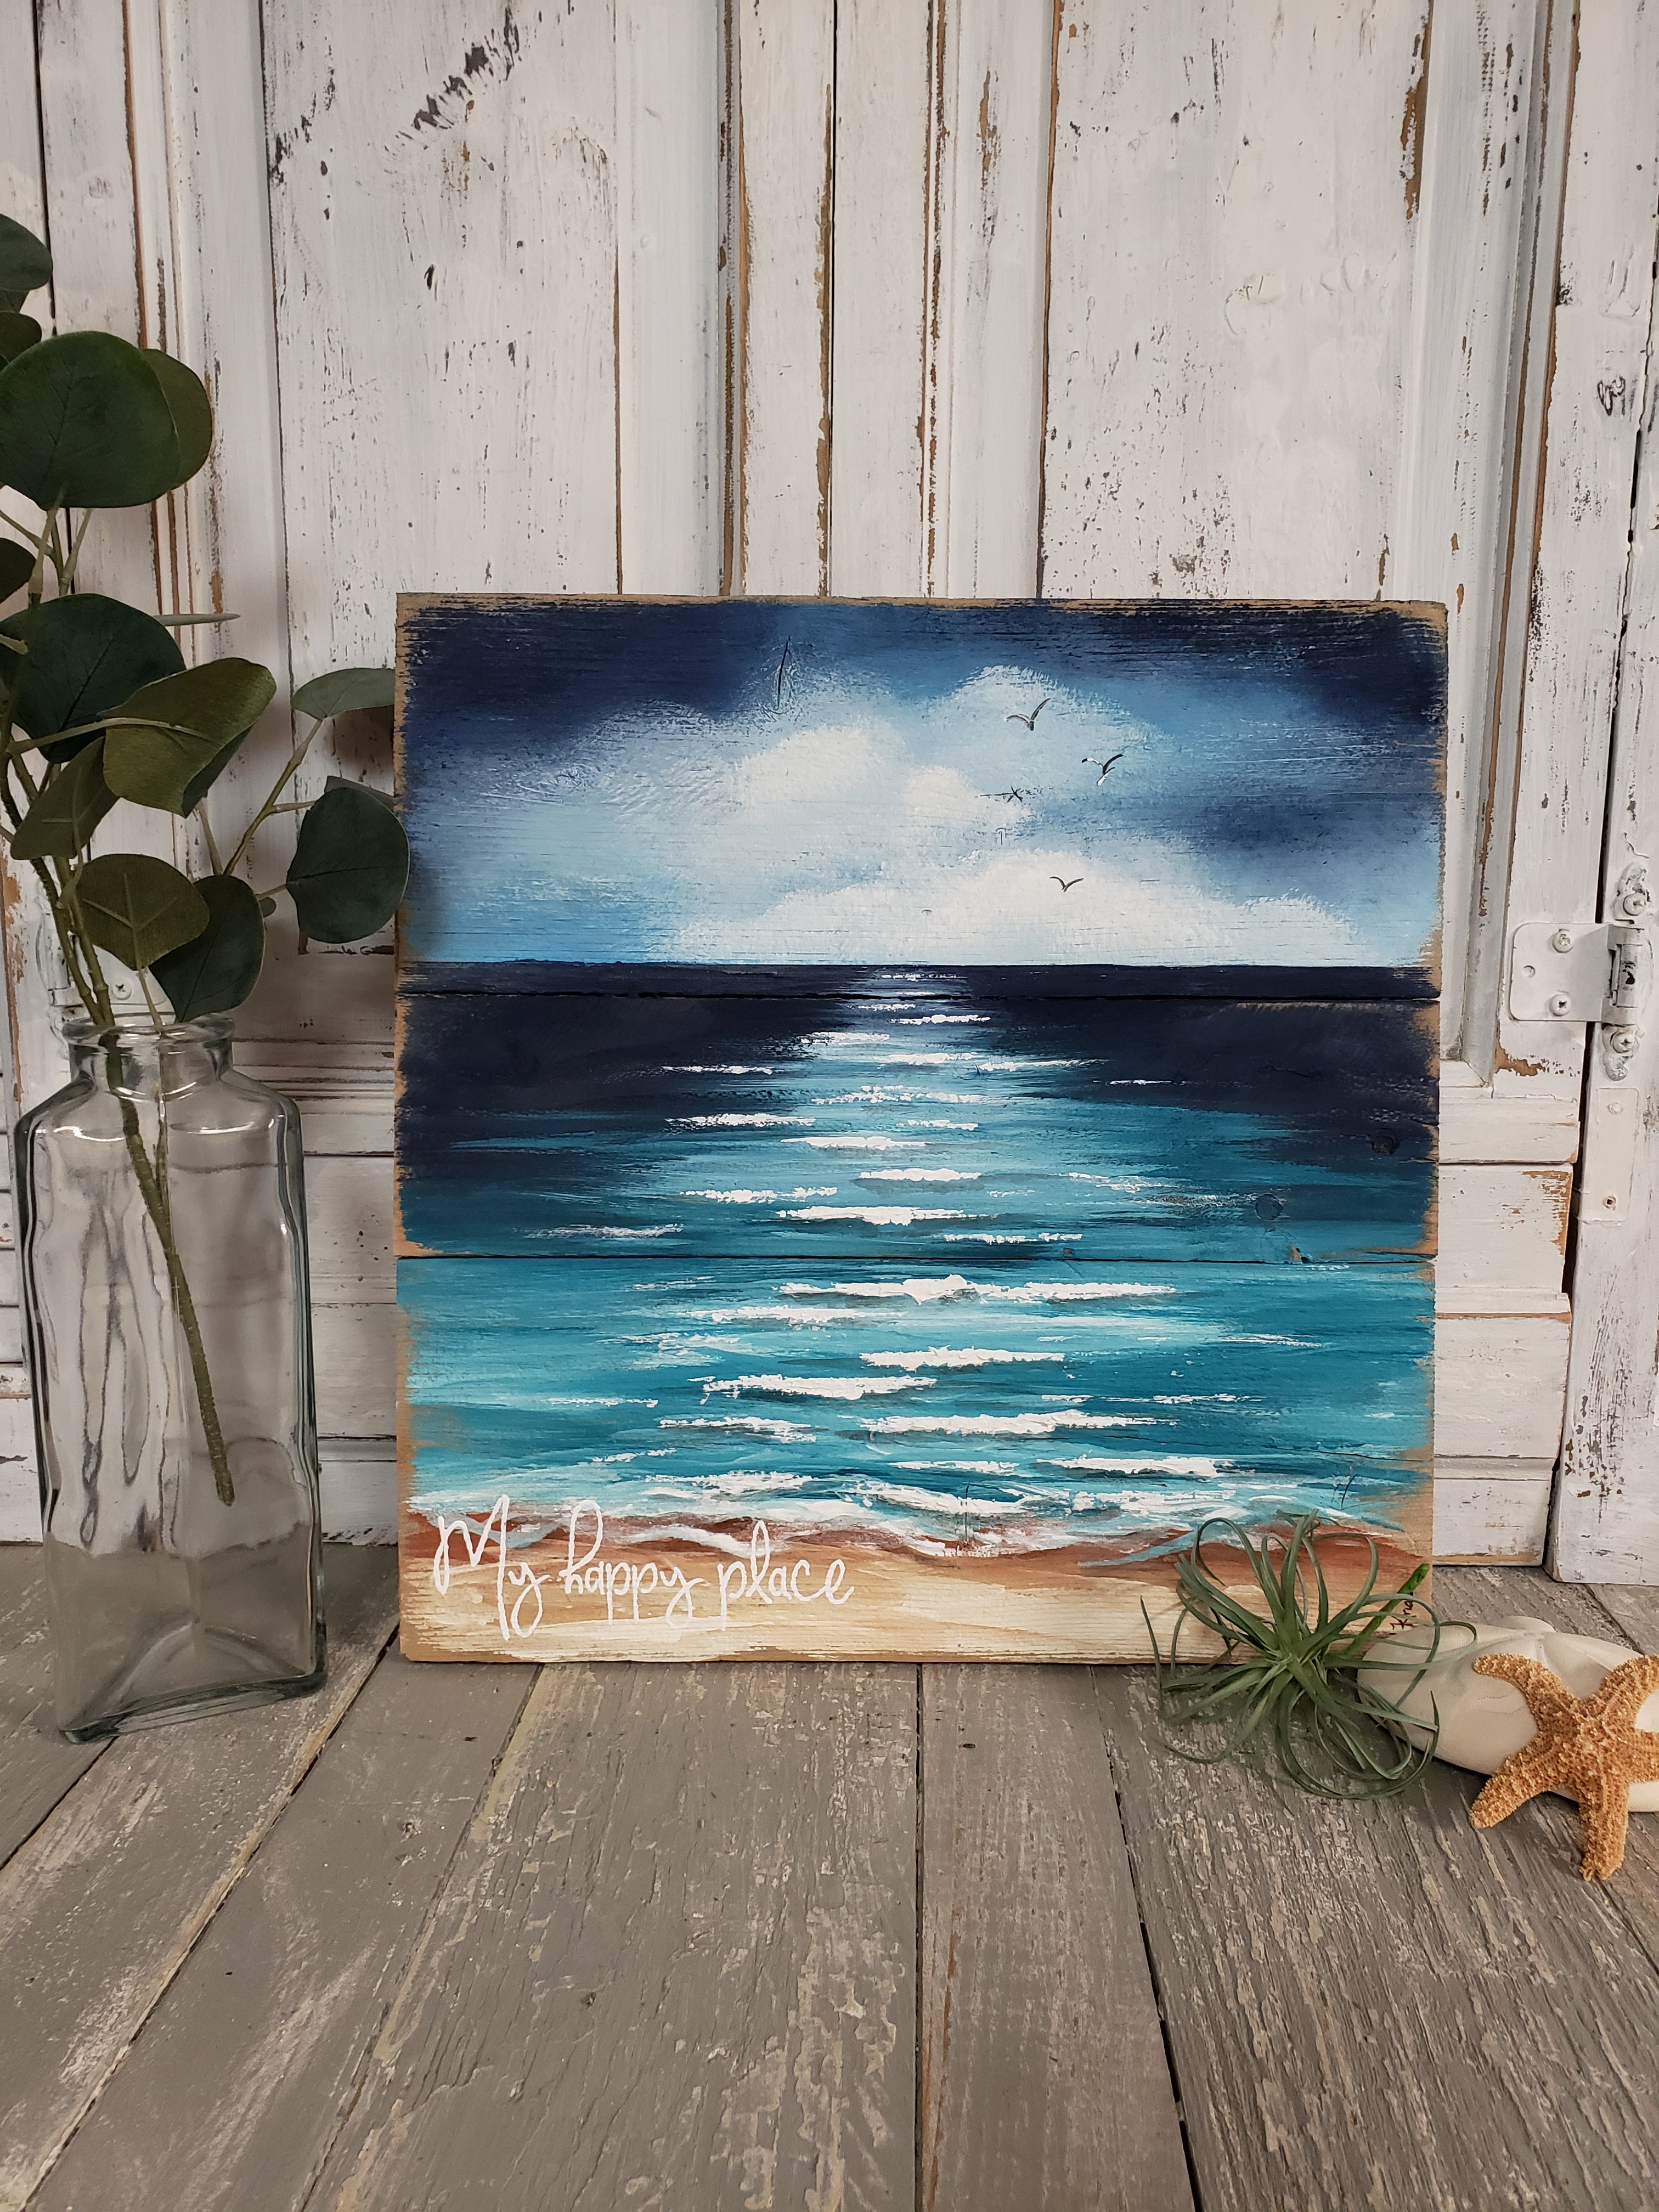 Hand painted beach pallet art, Reclaimed wood cottage decor, my happy place